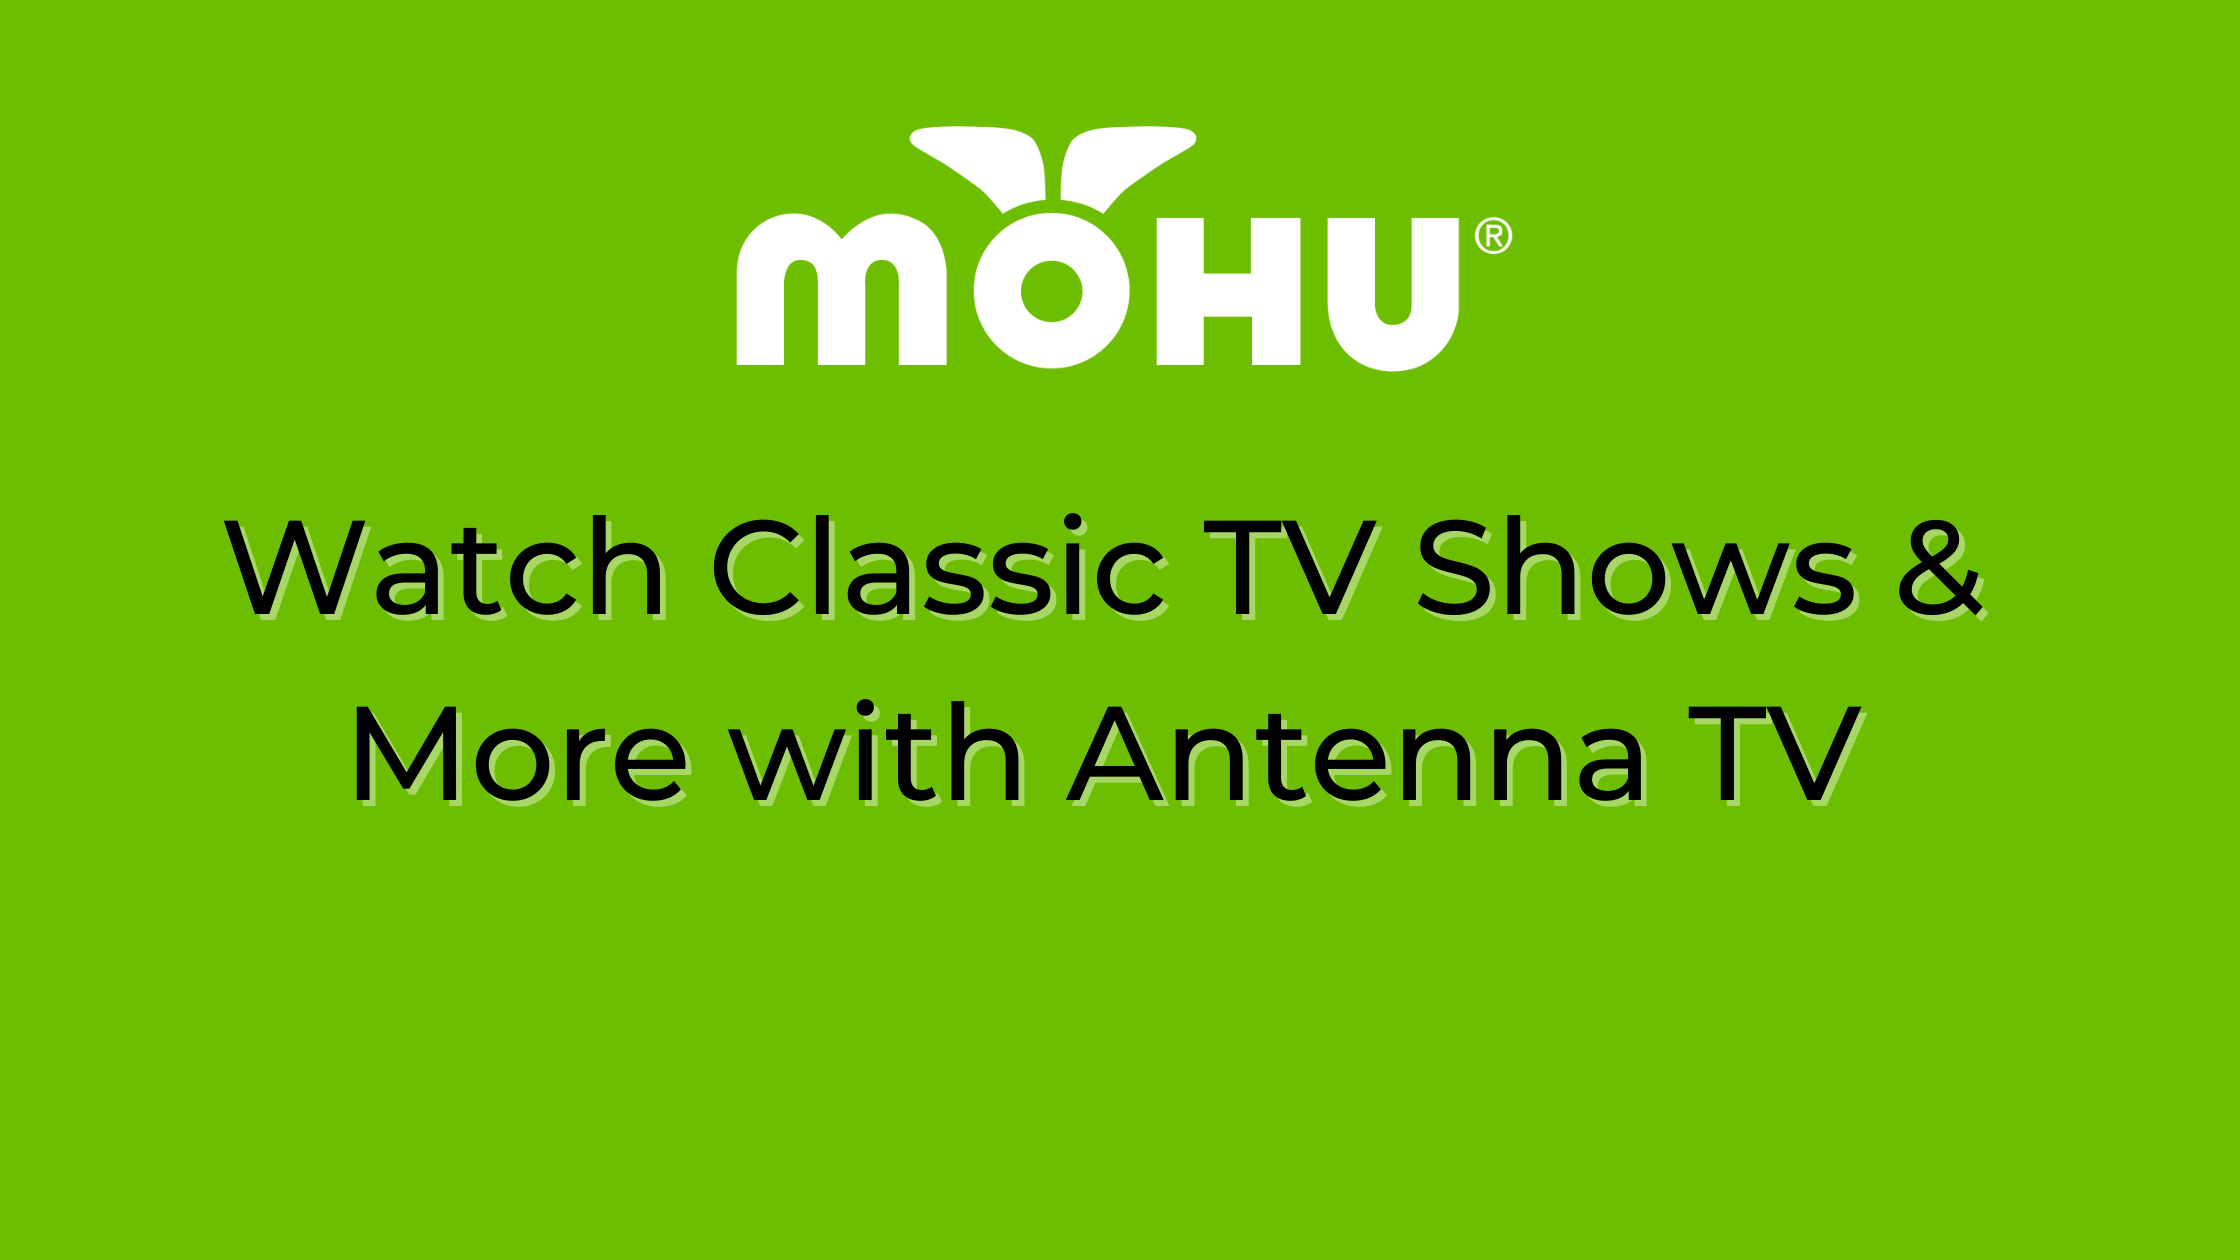 Watch Classic TV Shows & More with Antenna TV, Mohu